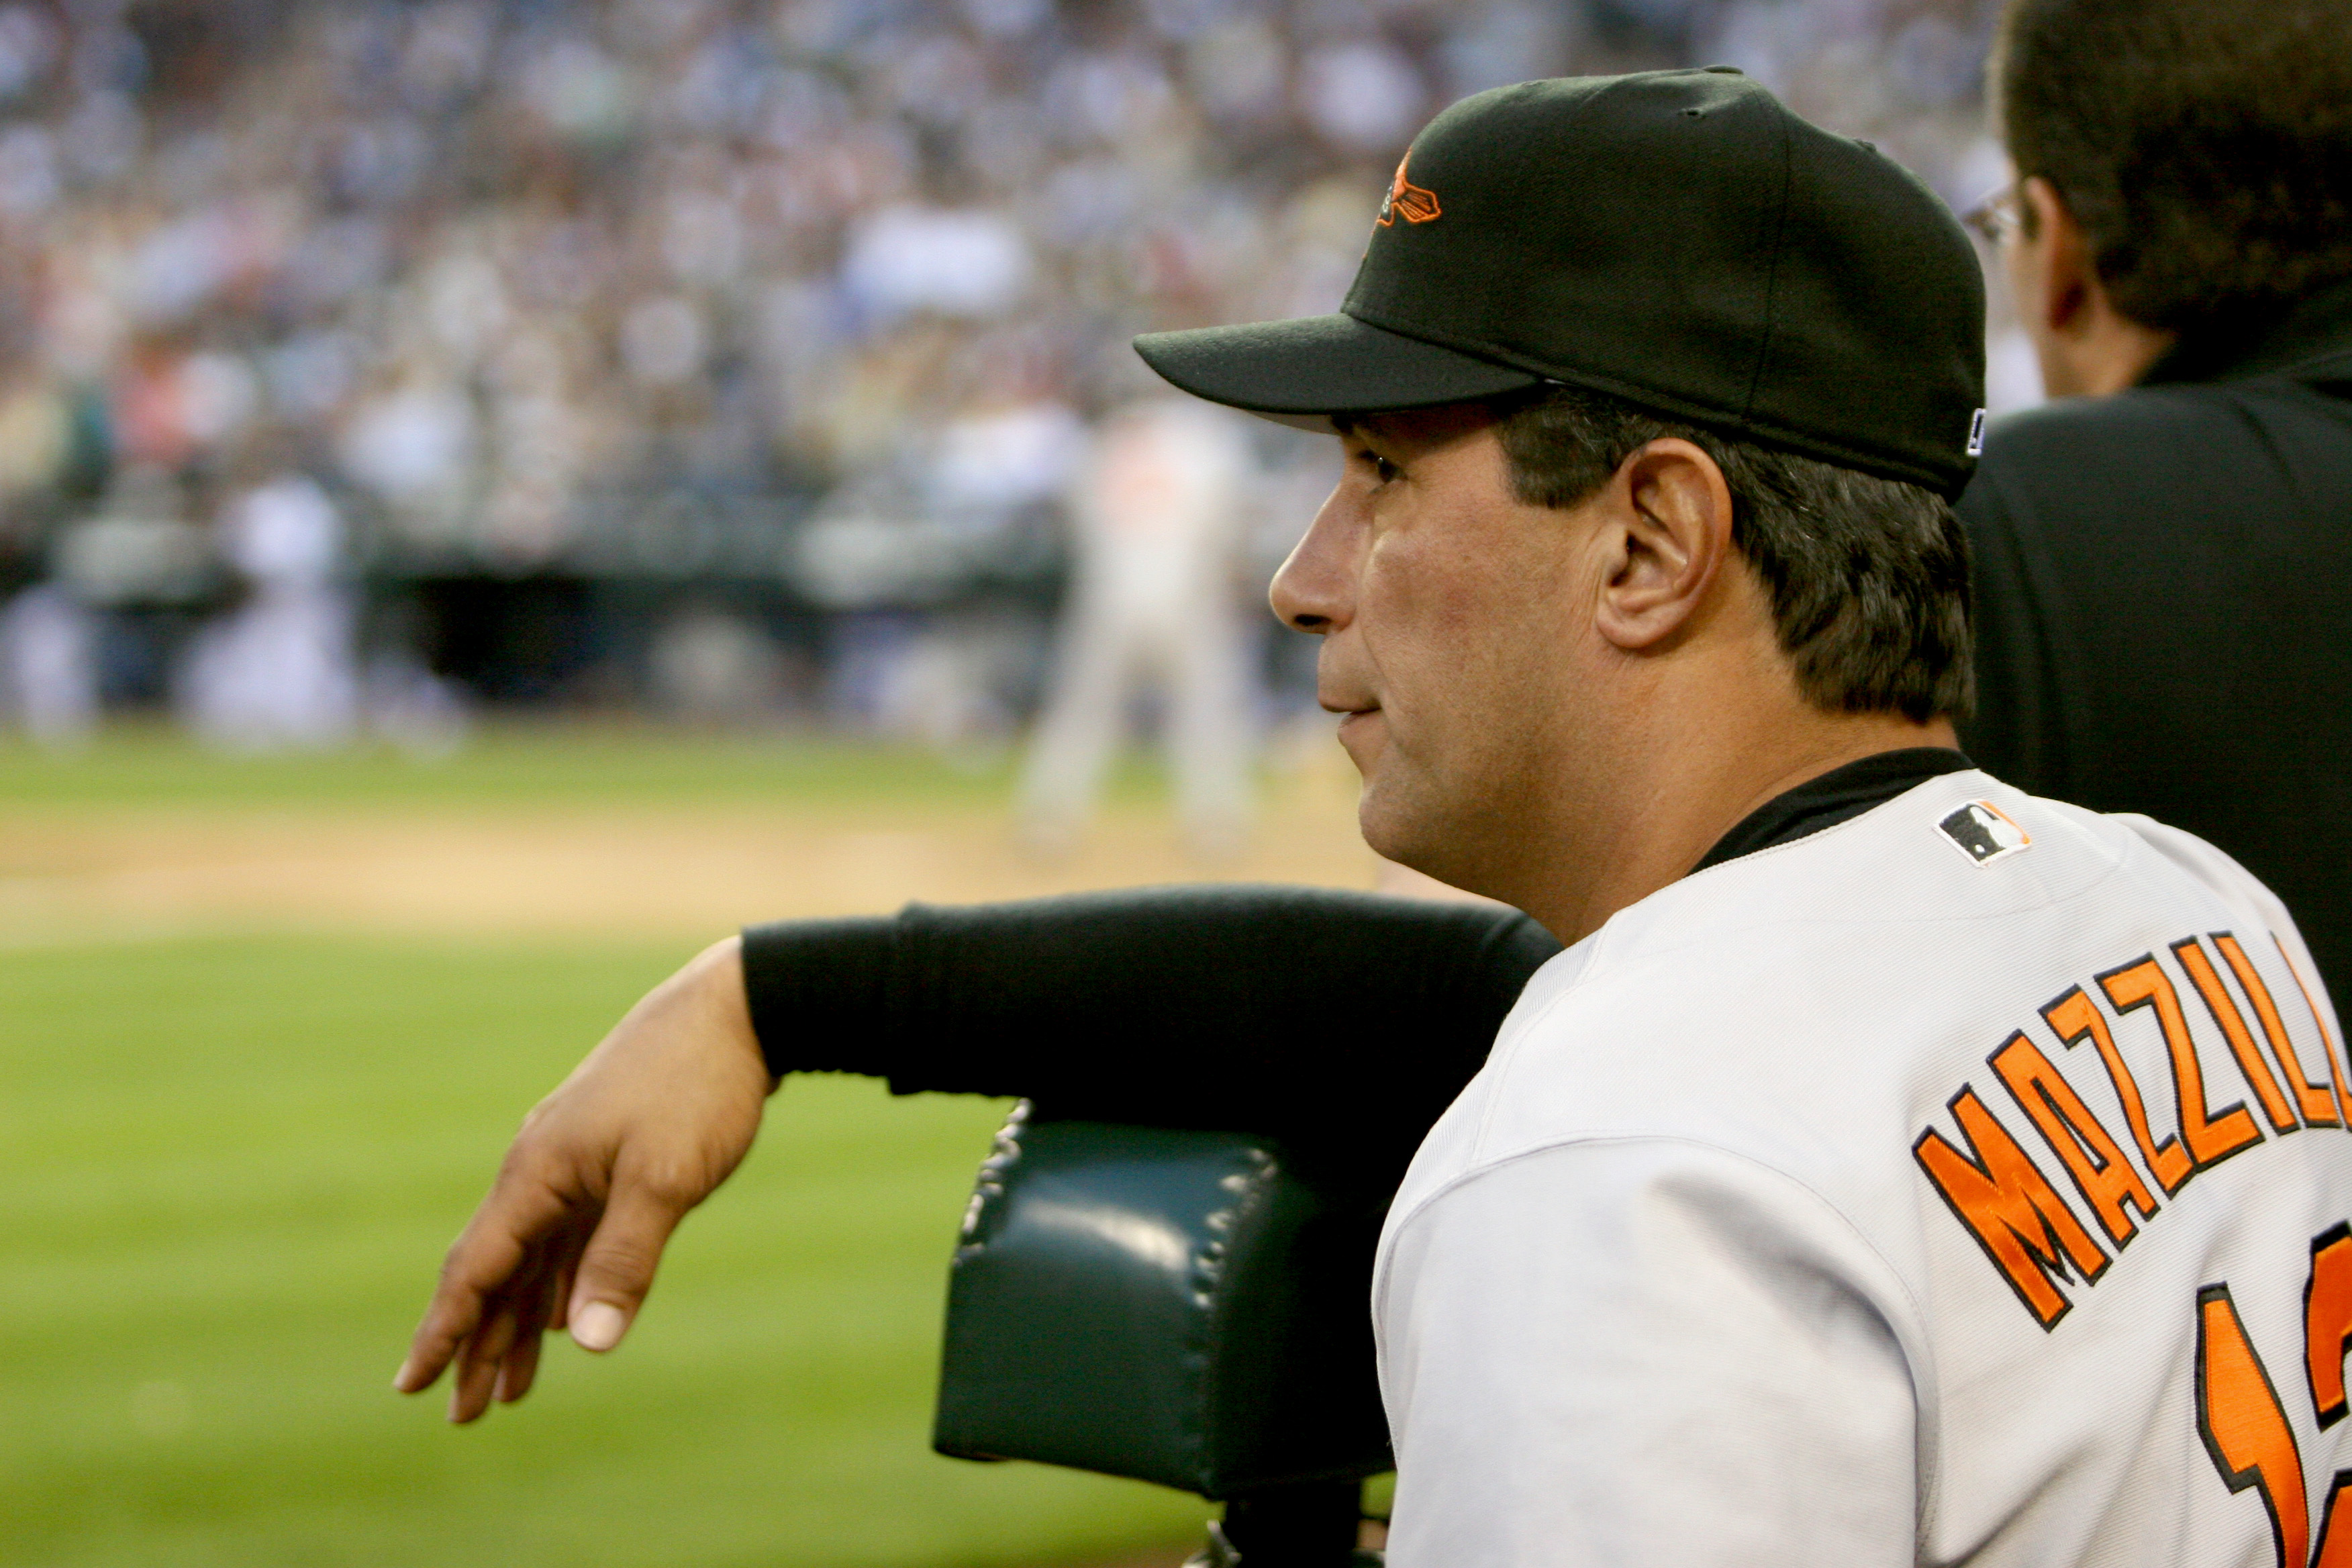 SEATTLE - JULY 14:  Manager Lee Mazzilli #12 of the Baltimore Orioles watches the game against the Seattle Mariners on July 14, 2005 at Safeco Field in Seattle Washington. The Orioles won 5-3.  (Photo by Otto Greule Jr/Getty Images)